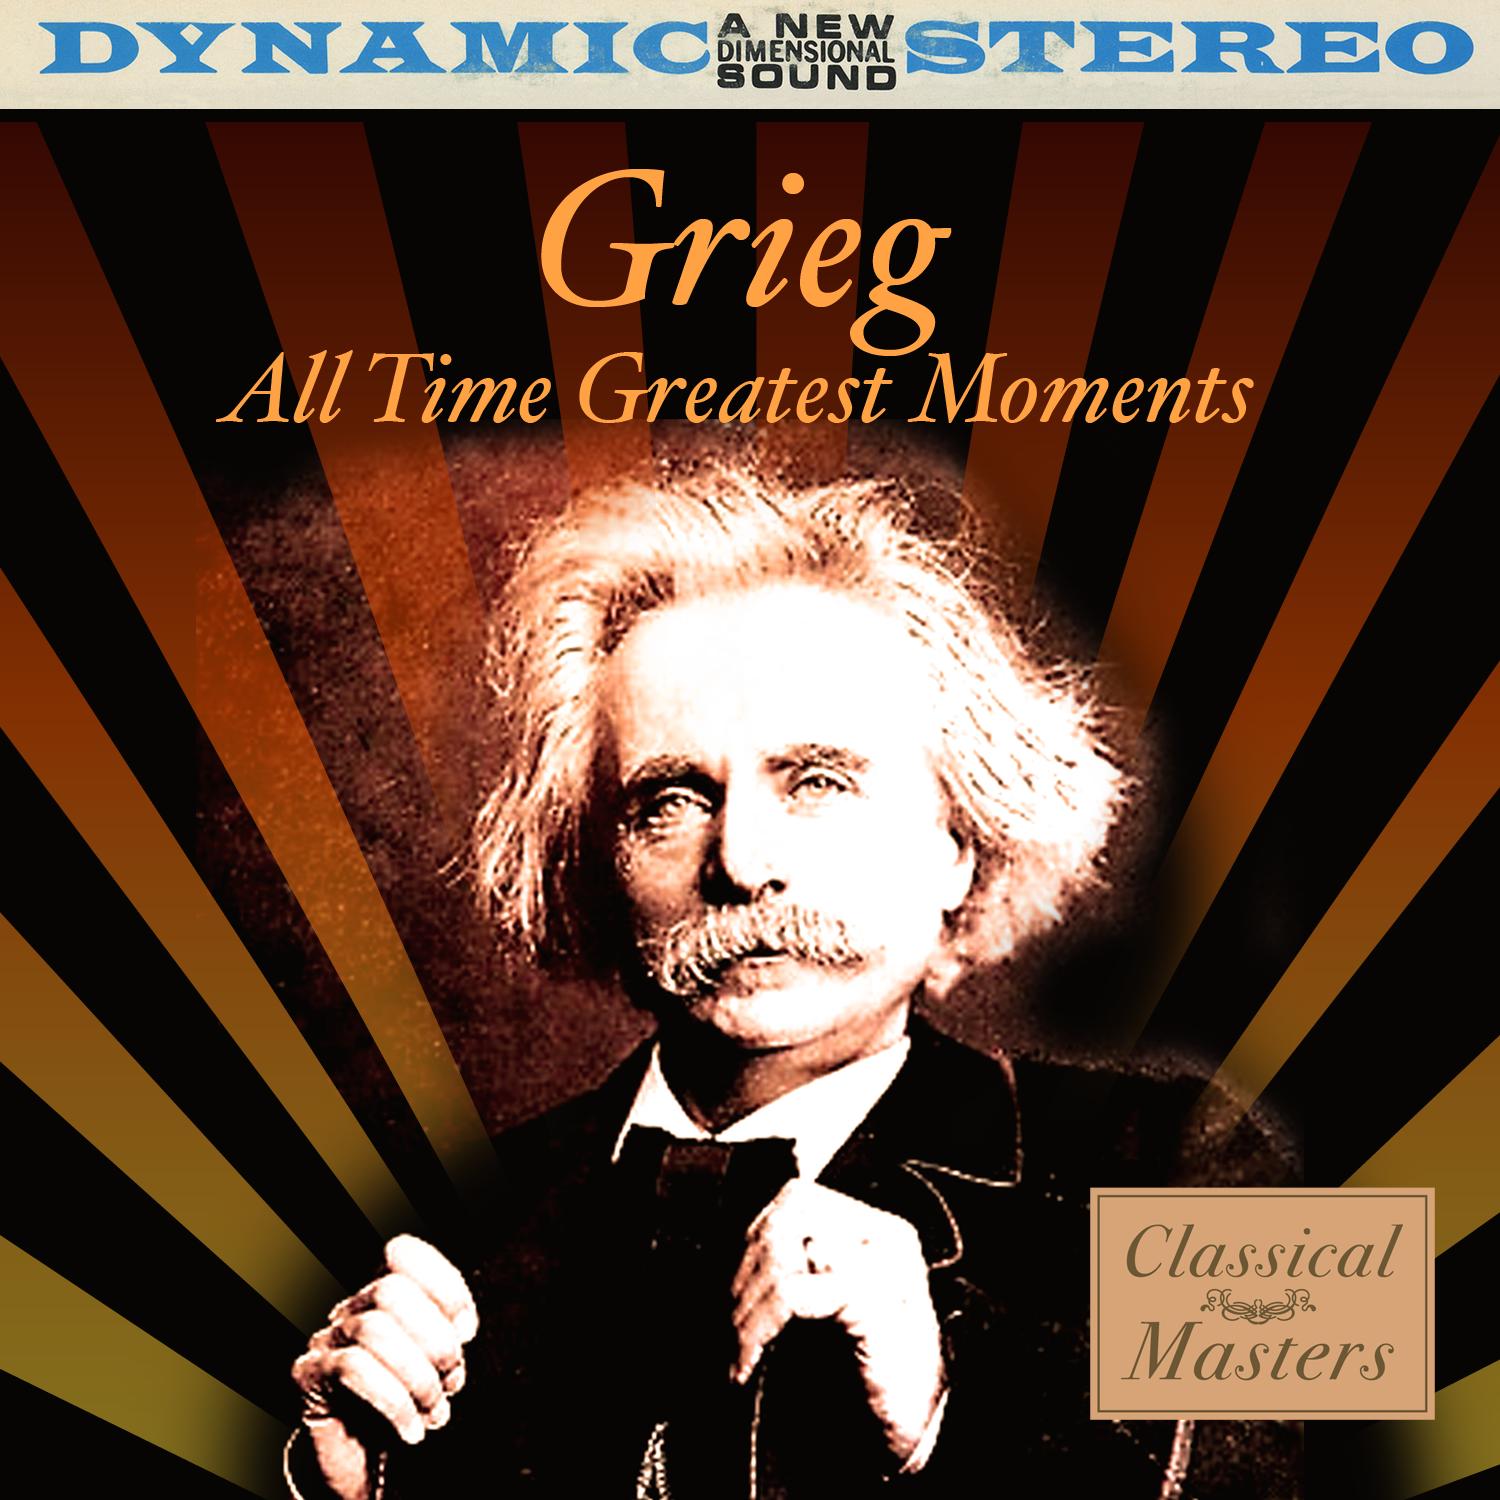 The Abduction Of The Bride - Peer Gynt Suite No. 2, Op. 55